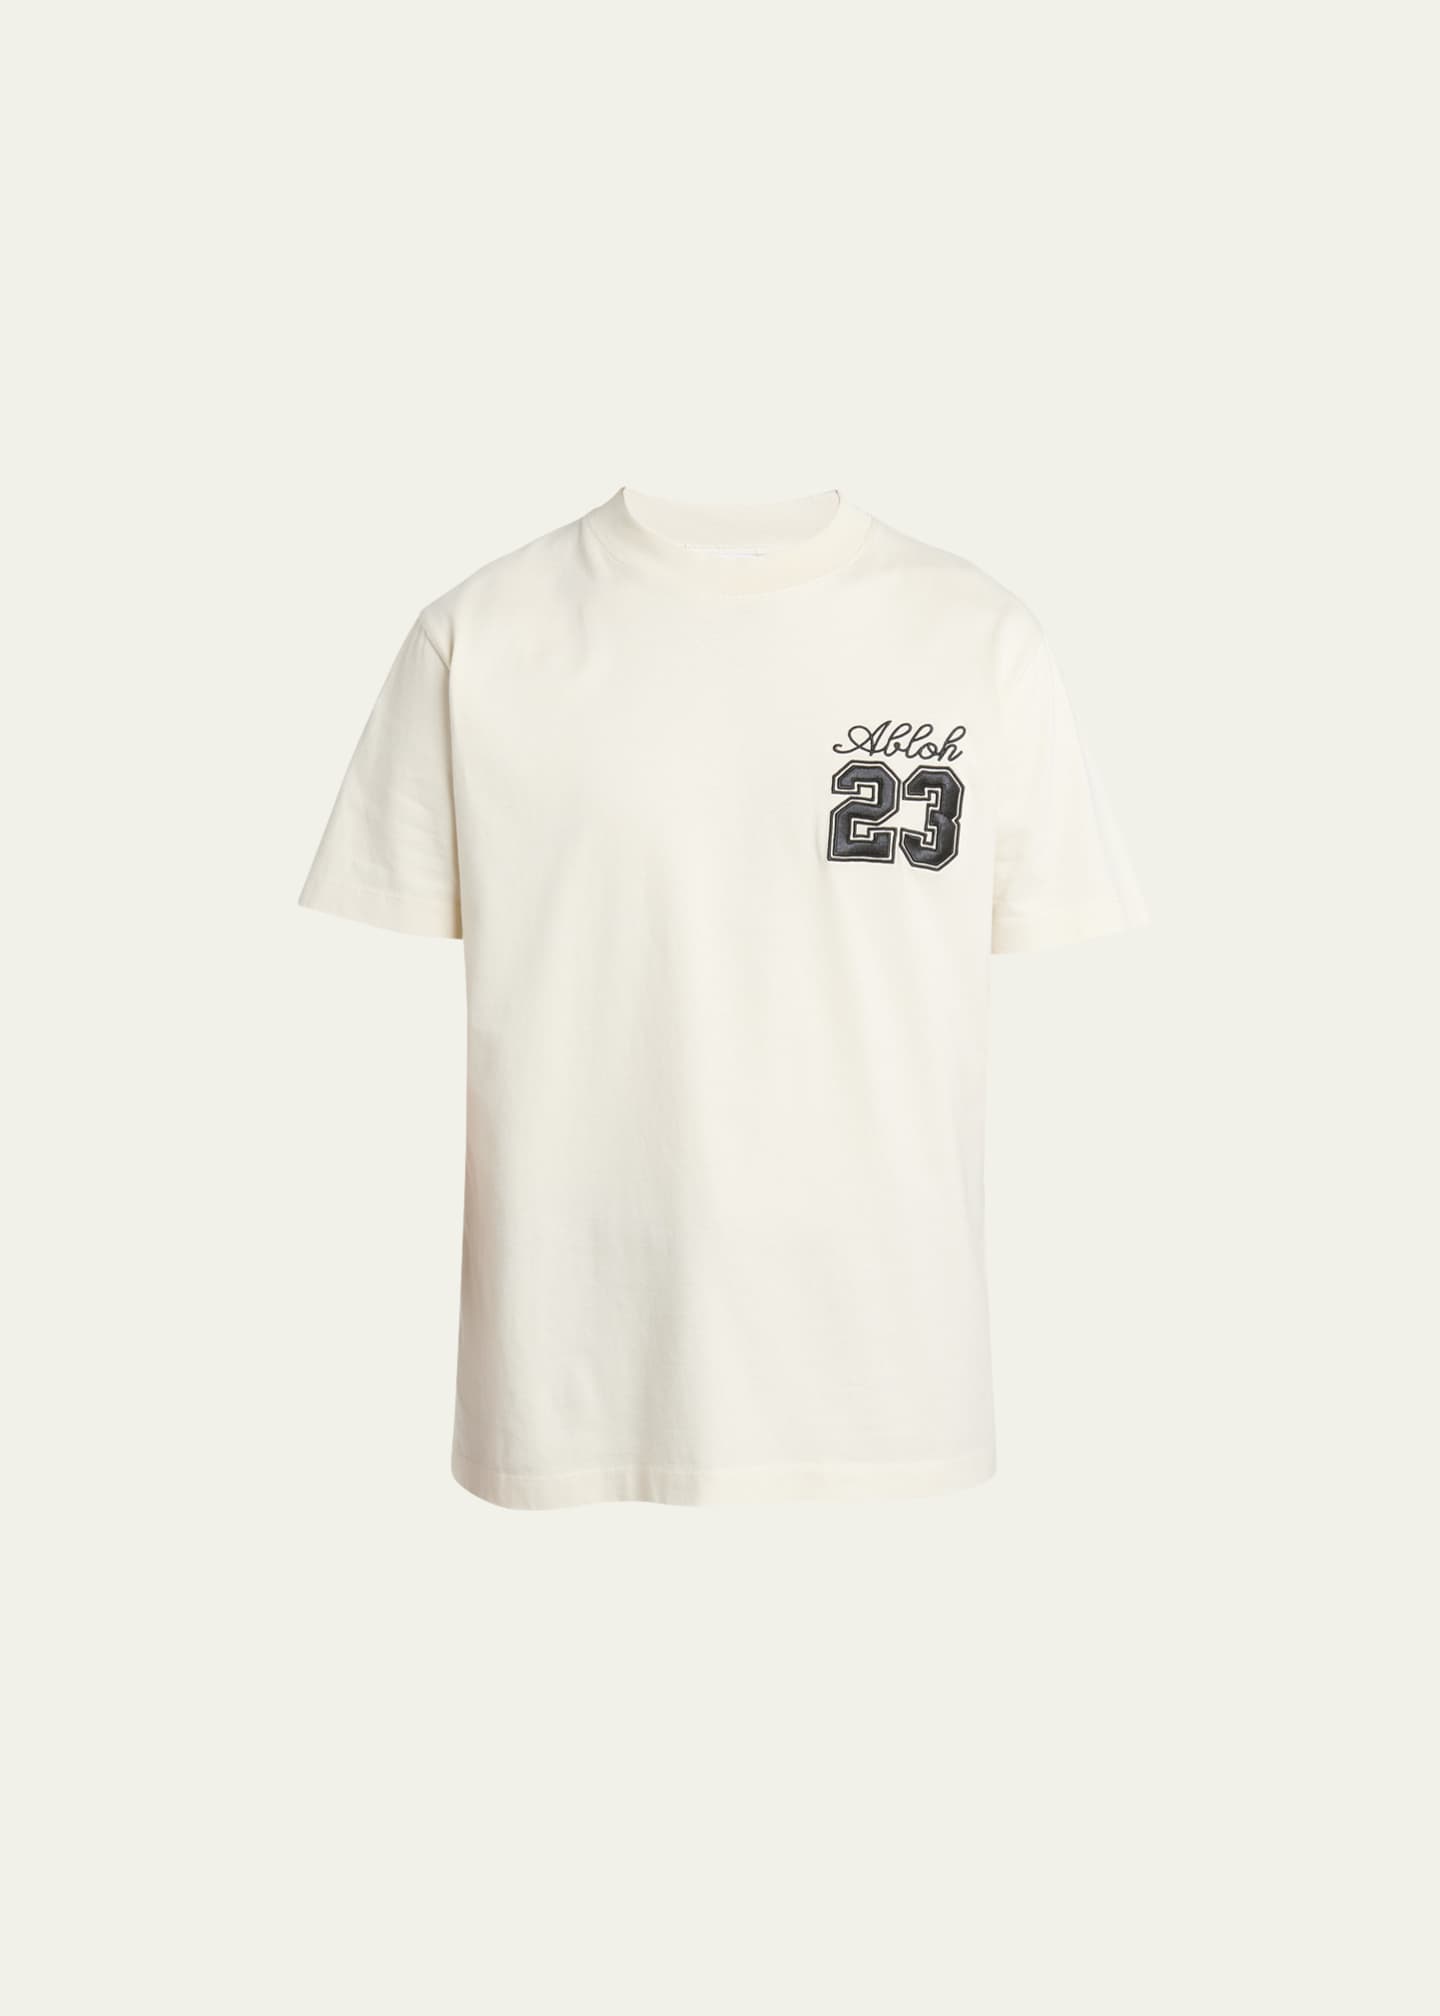 Off-White Men's Abloh Embroidered T-Shirt - Bergdorf Goodman